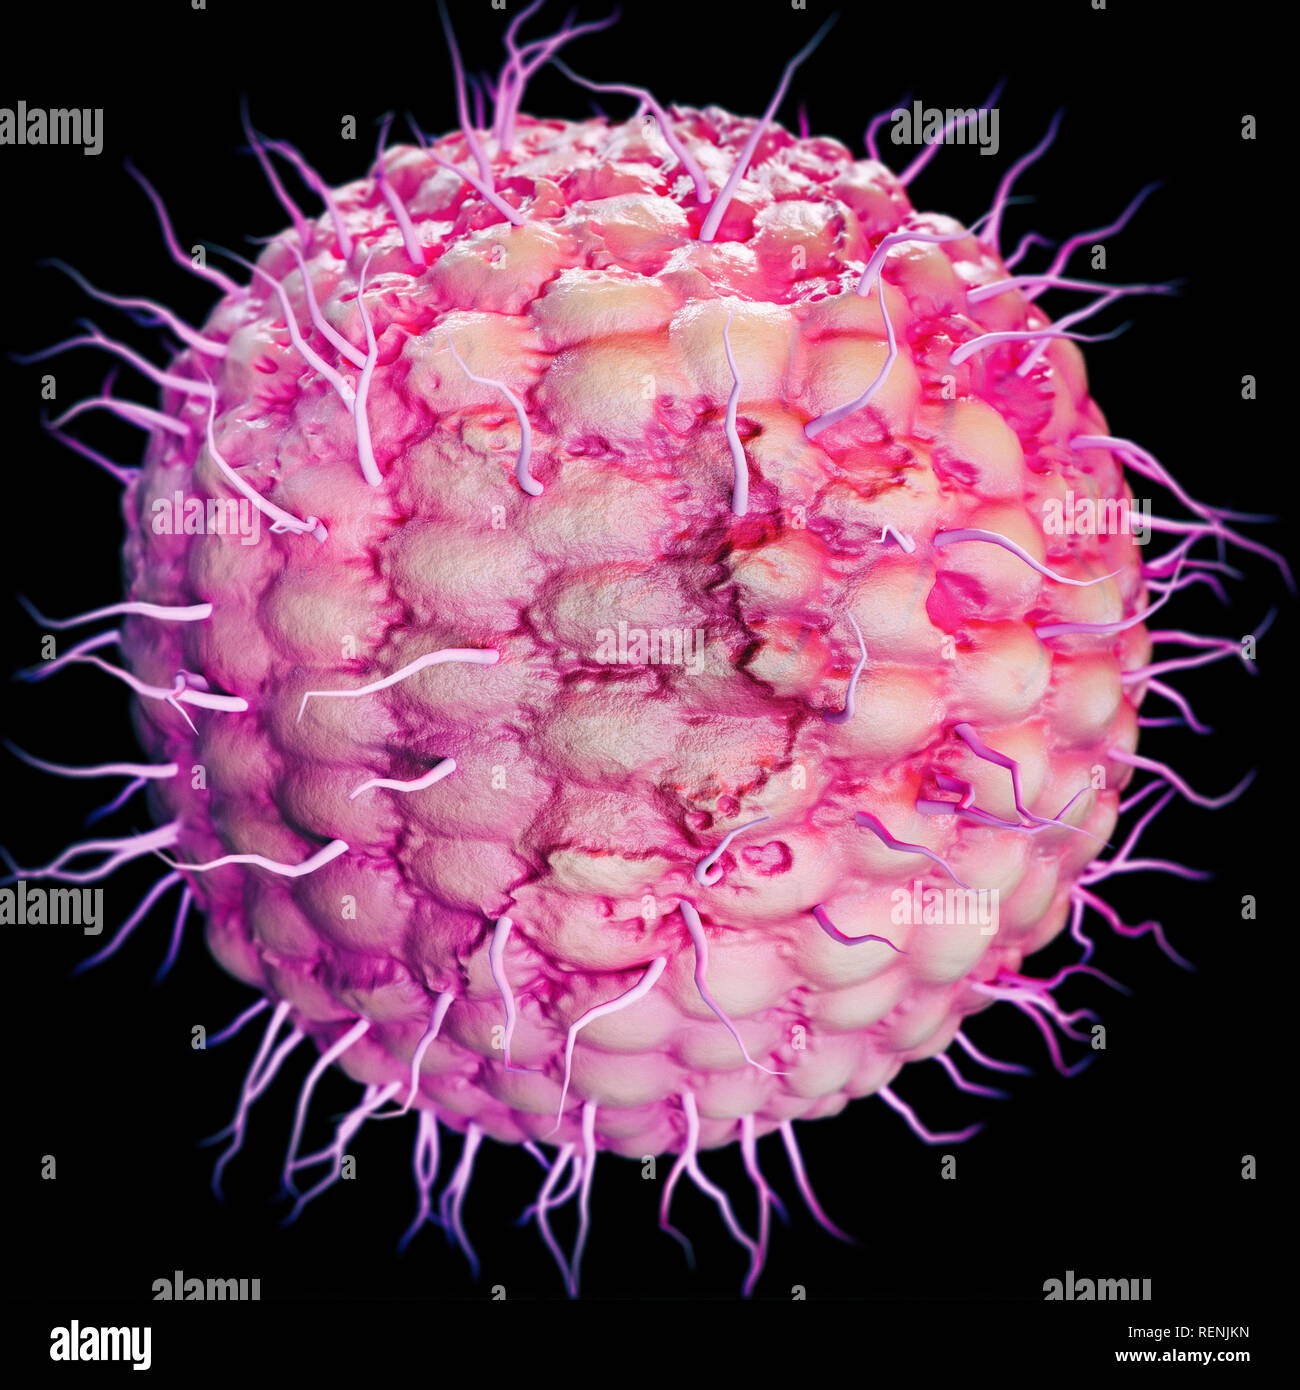 Varicella zoster - Herpes Zoster - Herpes Virus - High details - 3D Rendering Stock Photo